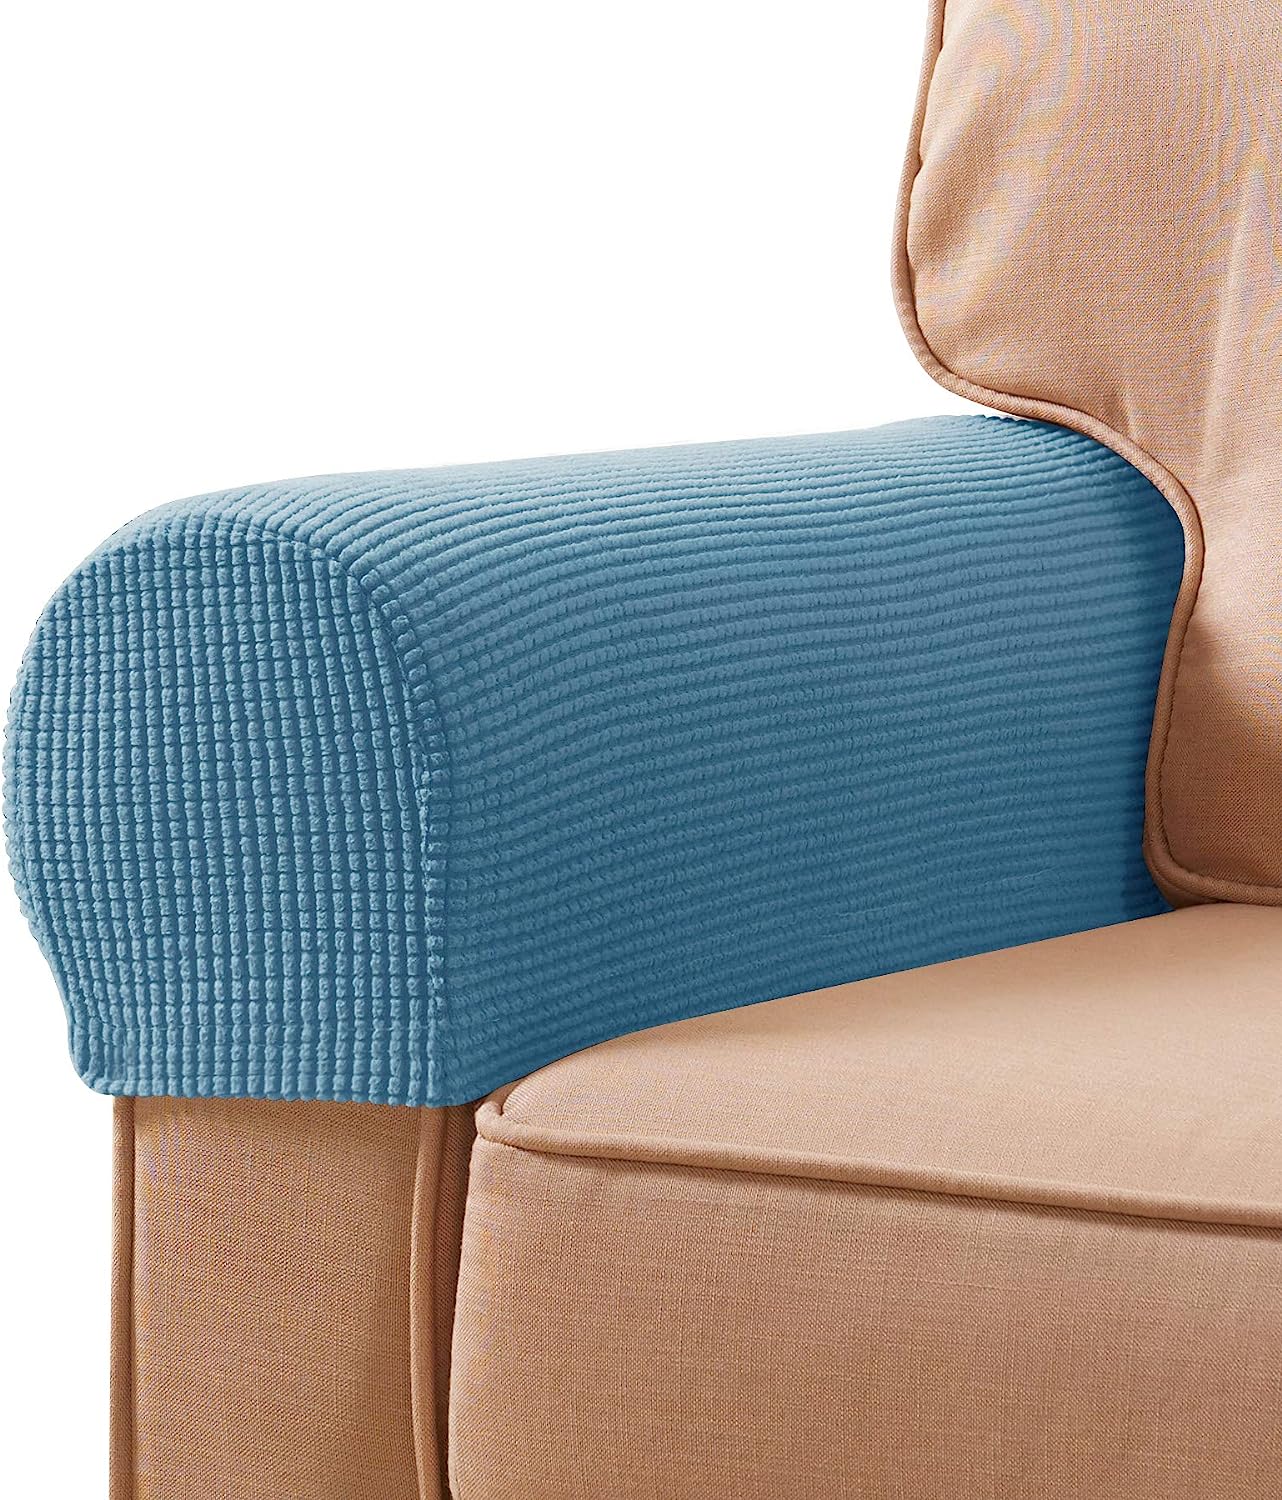 Sofa Arms Cover - Armrest Hero Cover - UPSELL